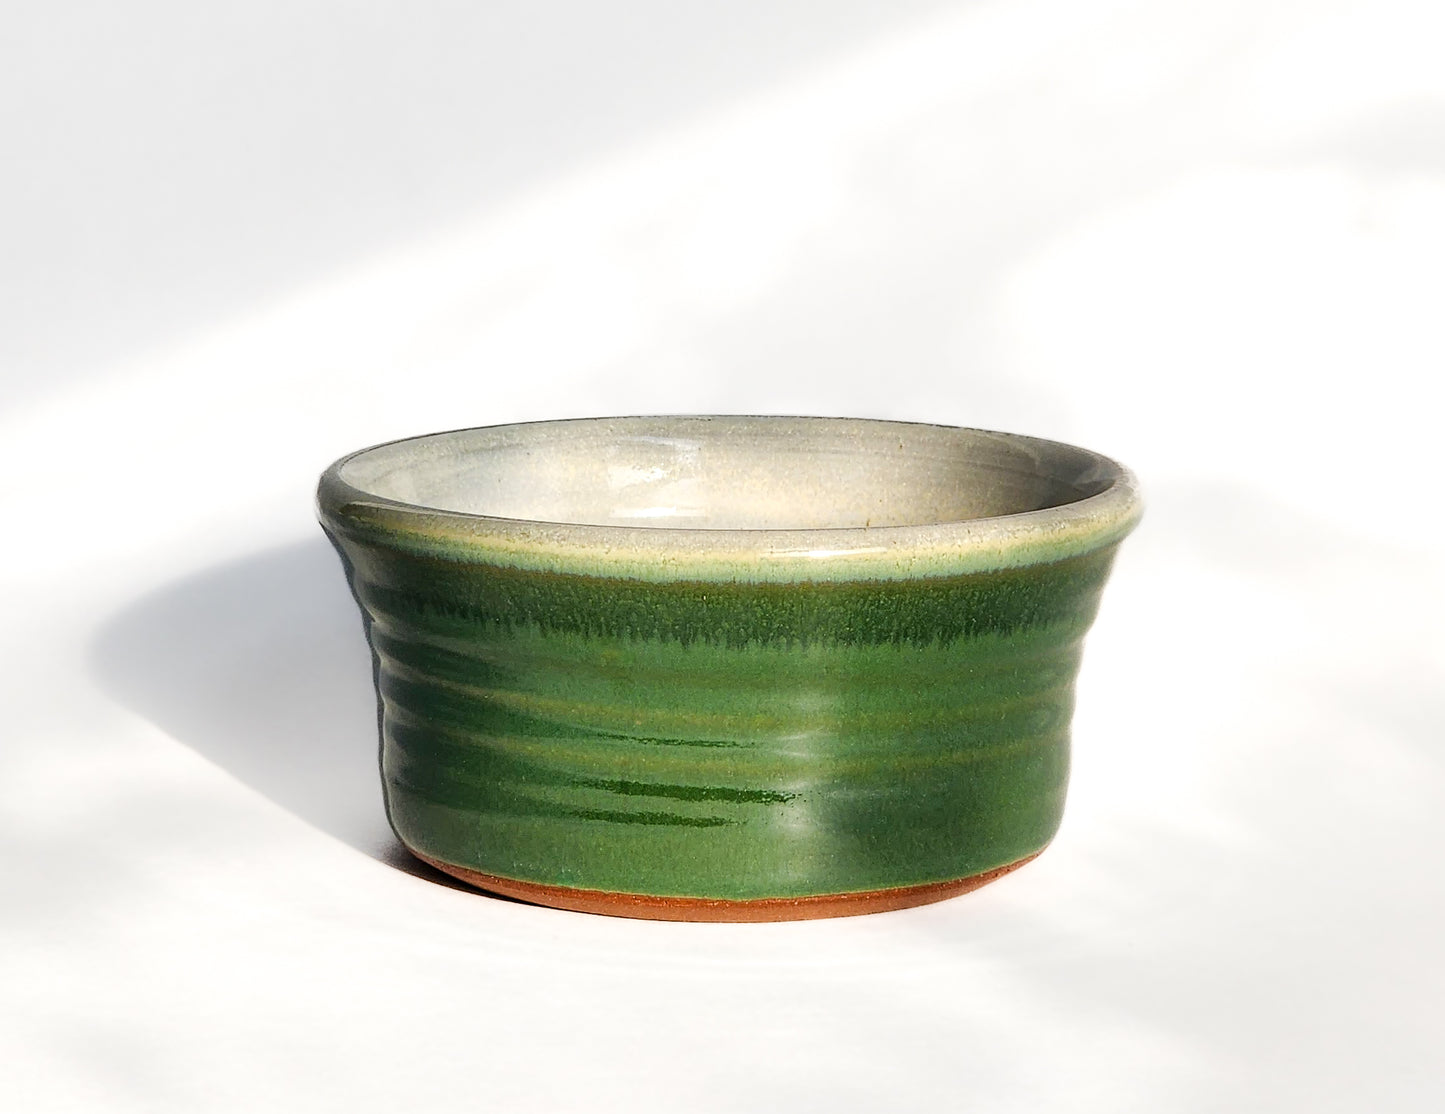 Image: Clinton Pottery's Handmade 1 Cup Flat Bottom Bowl in Dark Green – A subtle nod to nature's richness, this machine washable bowl seamlessly blends artistry with practicality. The deep dark green color evokes the tranquility of lush forests and foliage. Perfect for serving snacks or infusing your space with a touch of natural elegance and versatility.